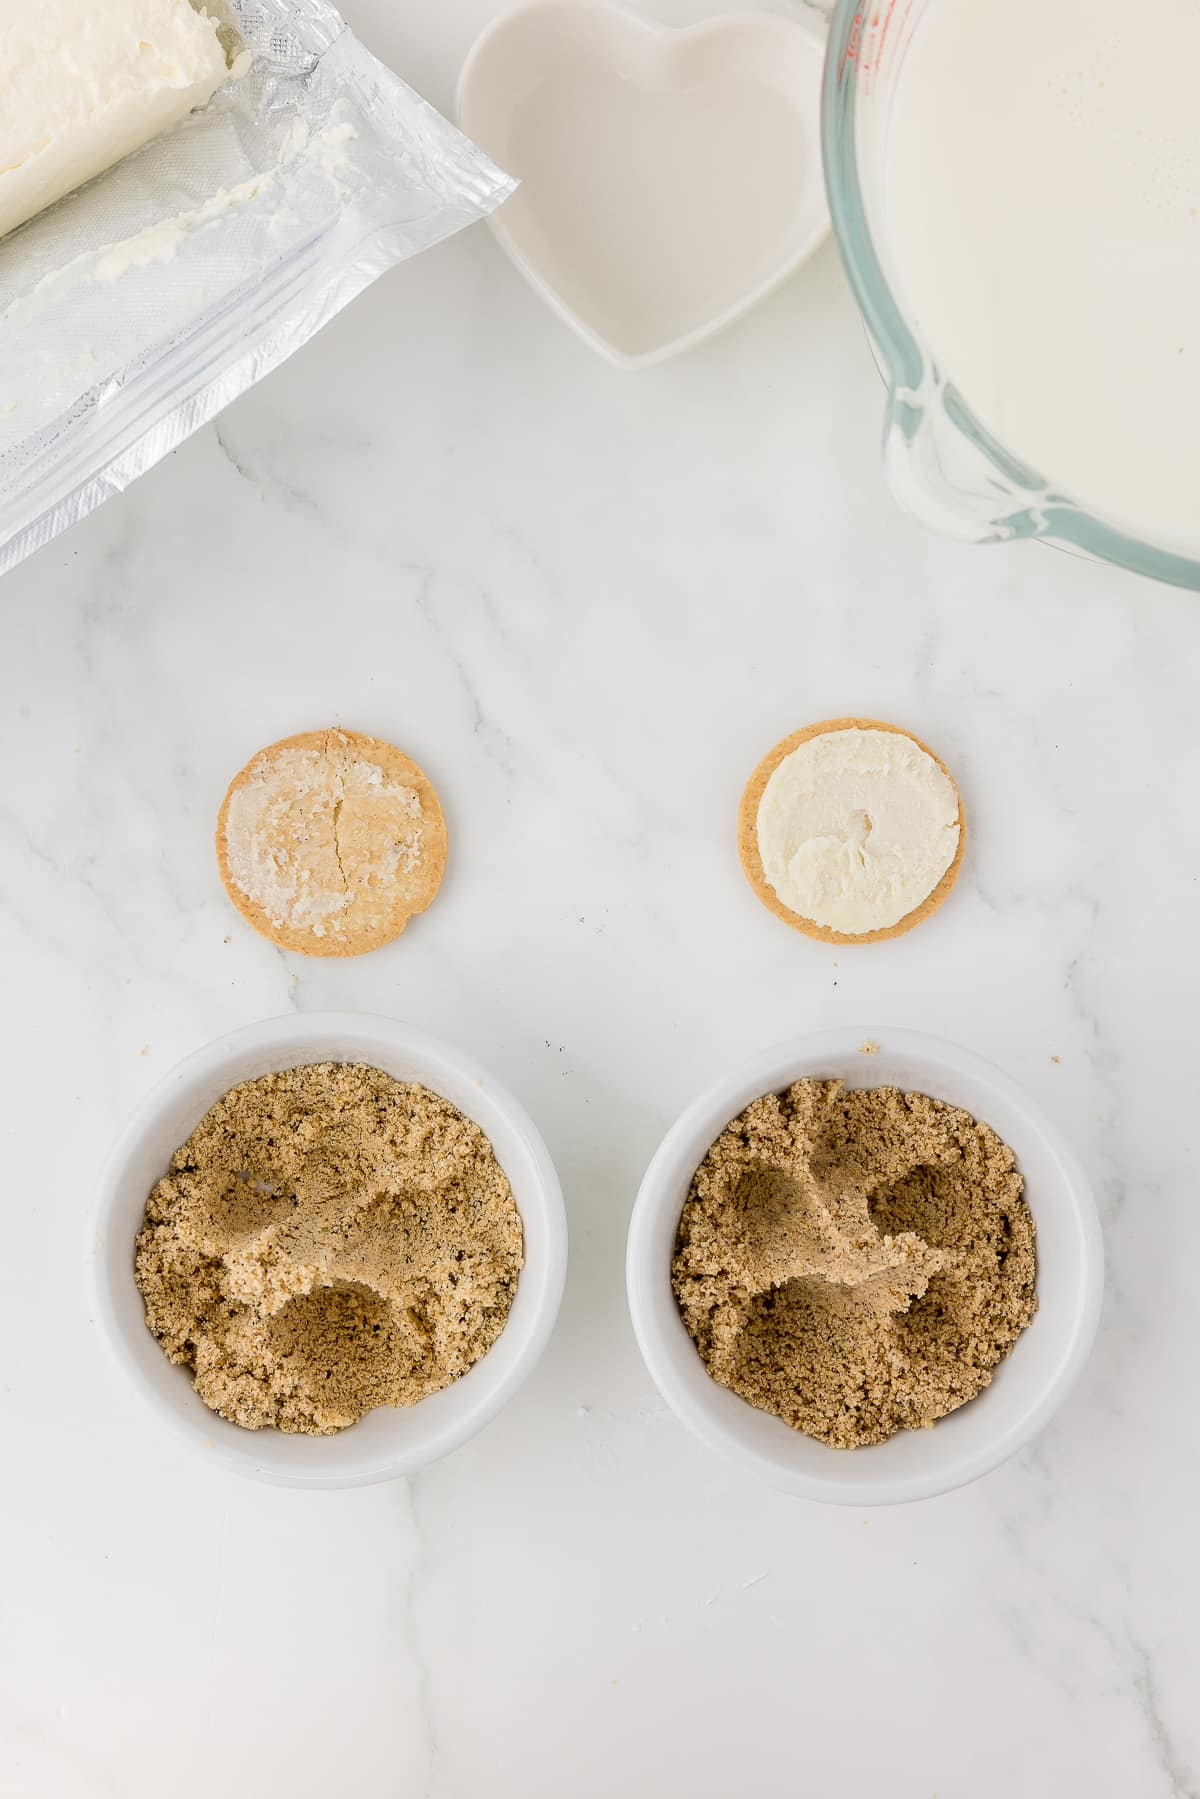 crumbled golden oreo cookie on a white marble countertop.